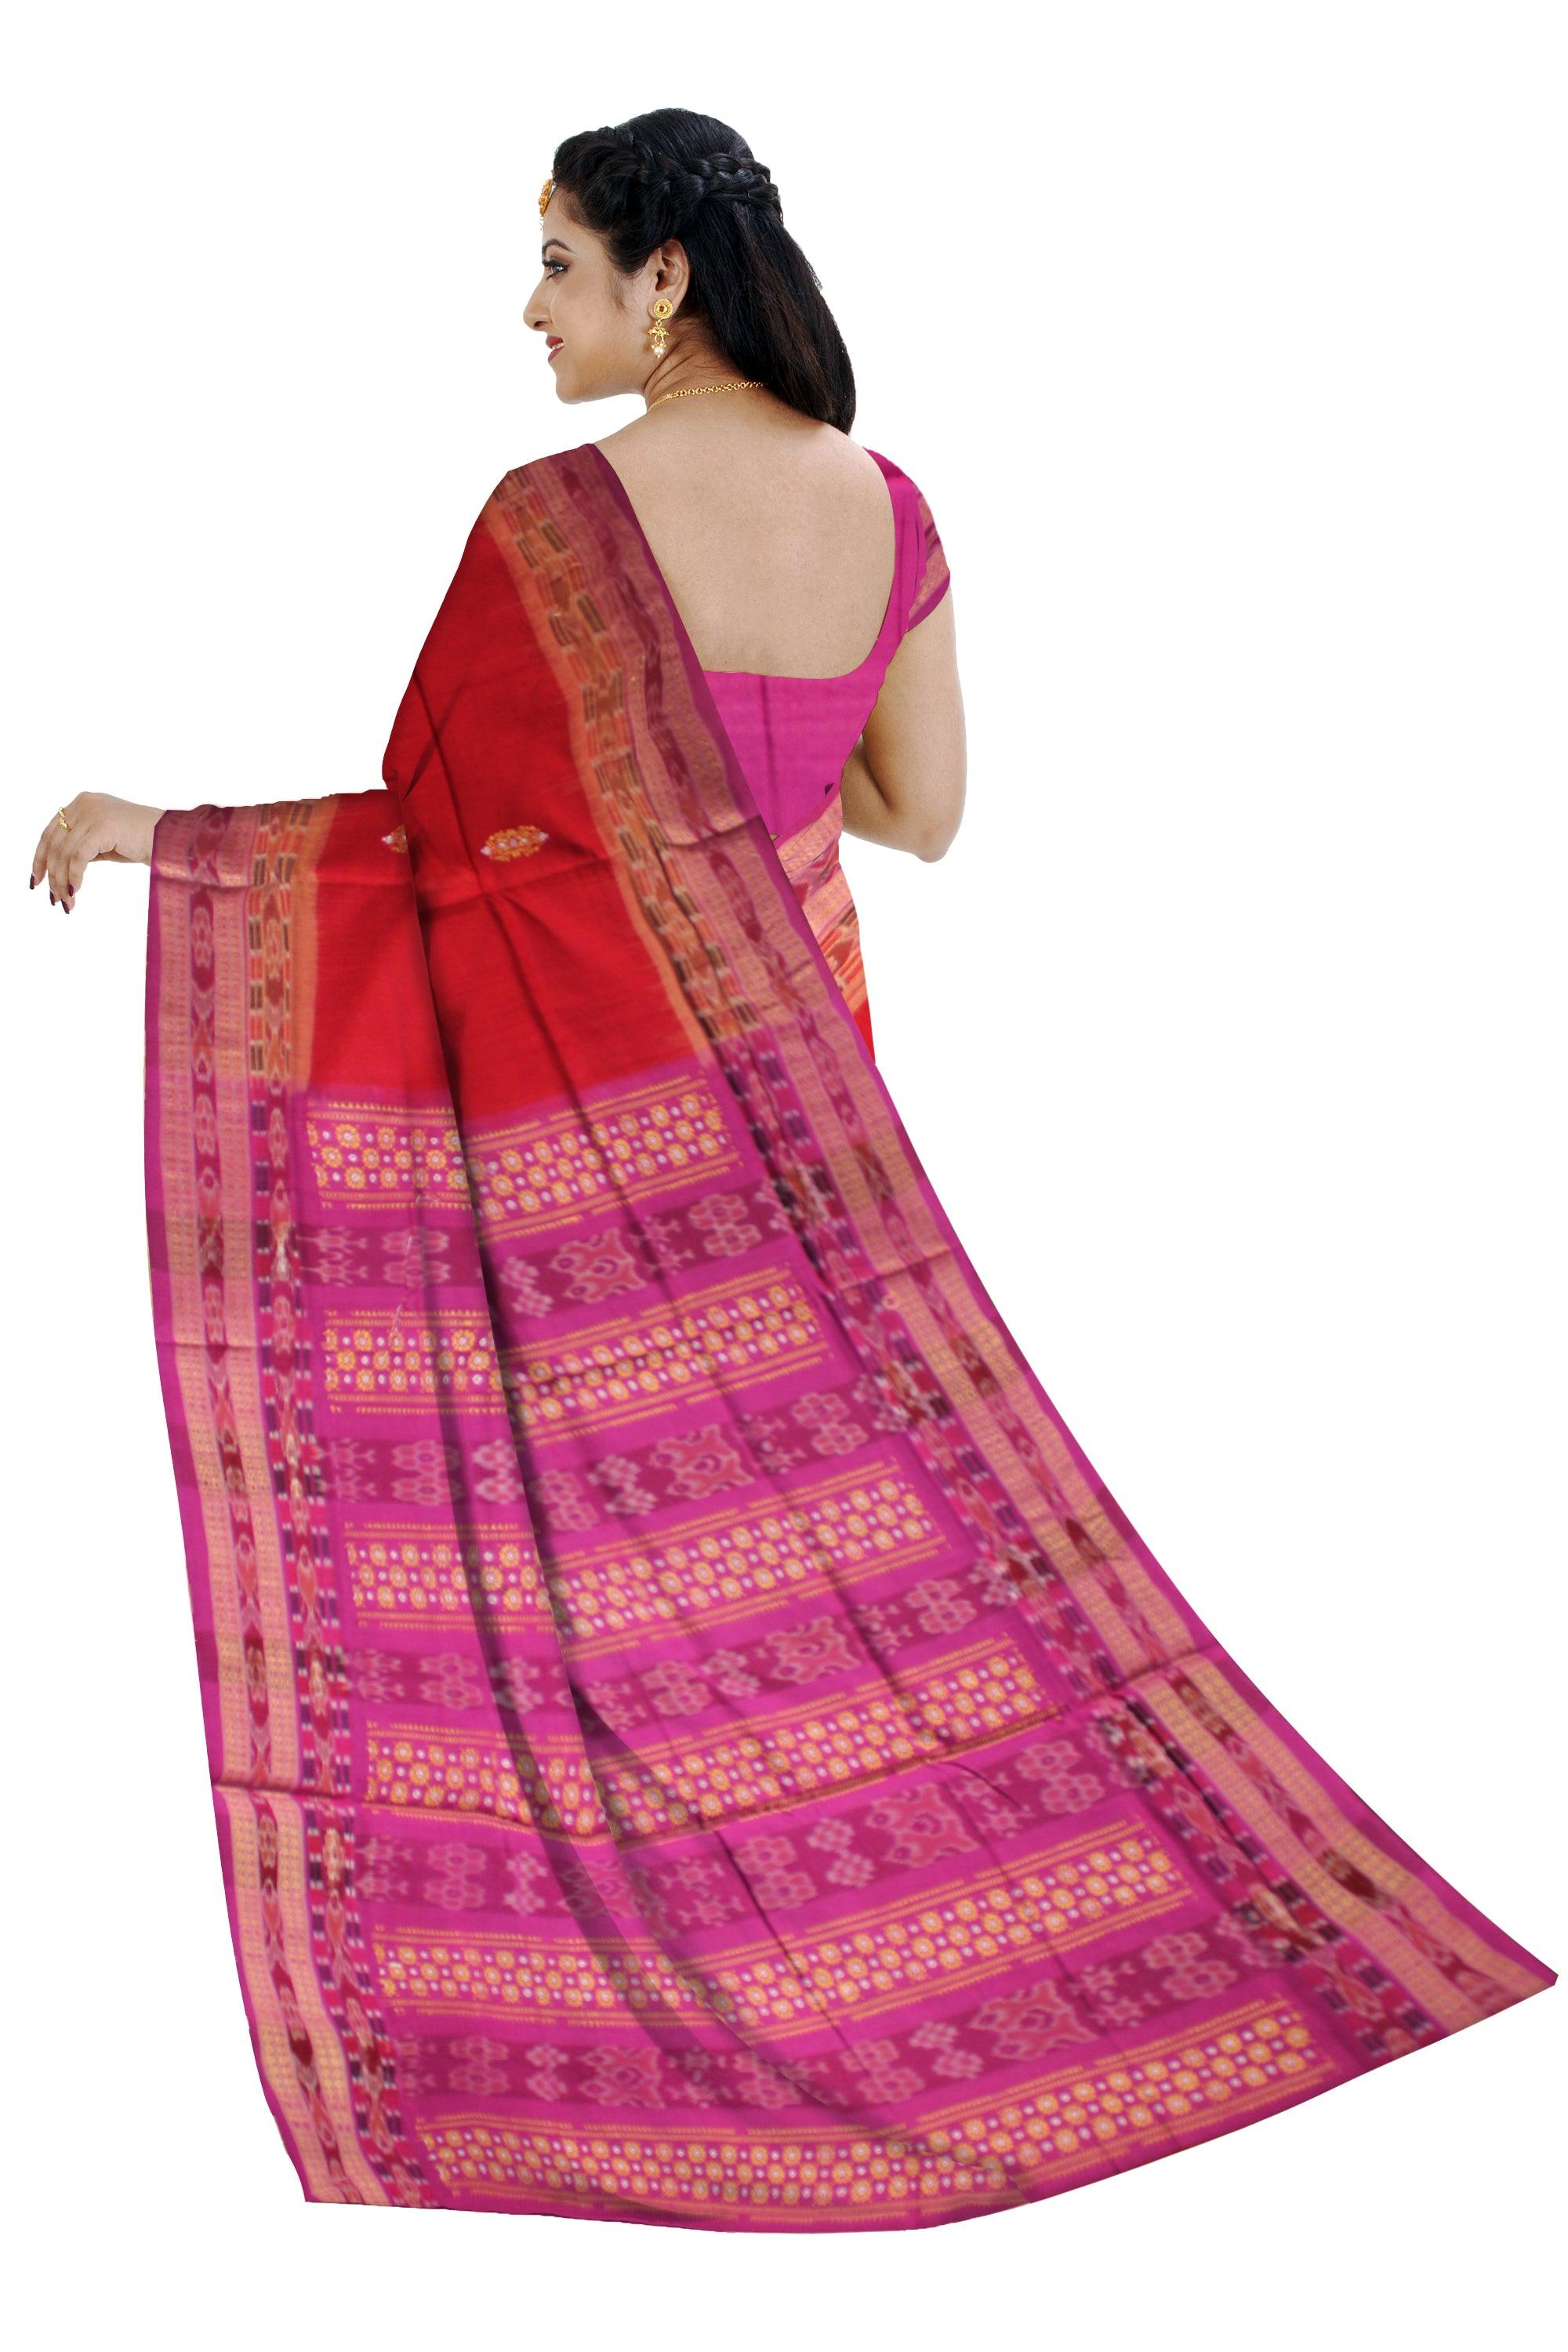 A BANDHA PATTERN COTTON SAREE IN RED AND PINK COLOR , WITH  BLOUSE PIECE. - Koshali Arts & Crafts Enterprise